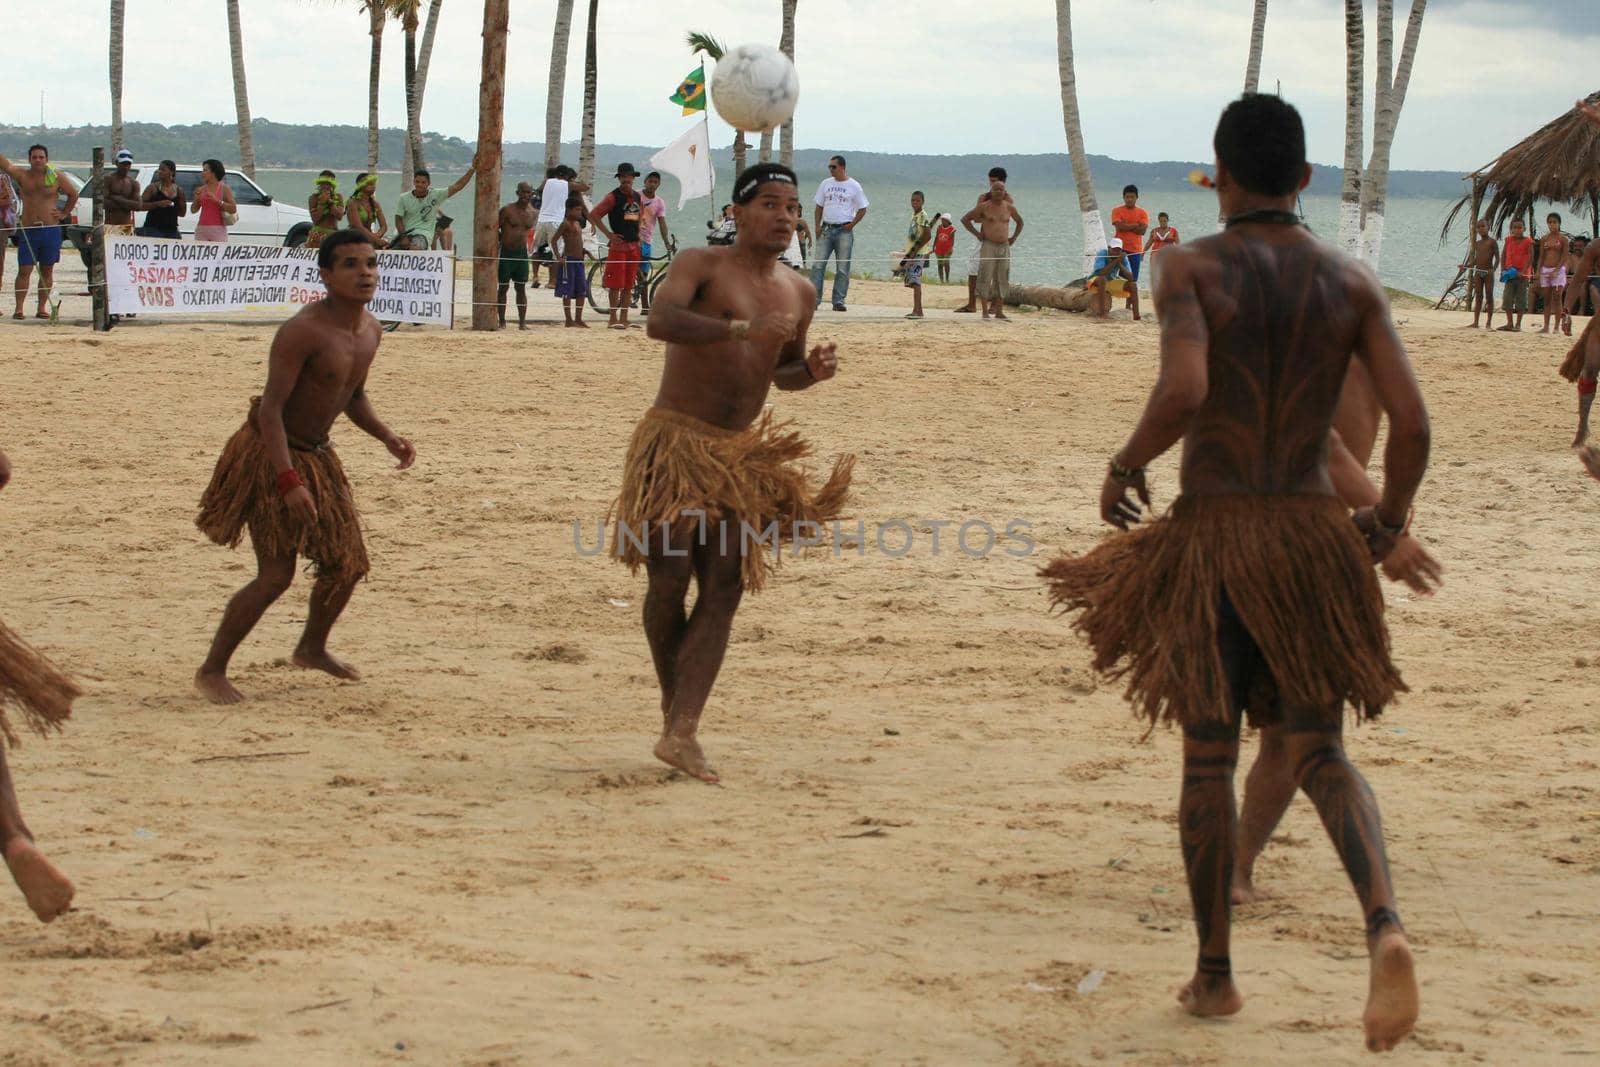 santa cruz cabralia, bahia / brazil - april 21, 2009: Ethnic Pataxo Indians are seen at a soccer match at Coroa Vermelha Village during the IX Edition of the Indian Games.